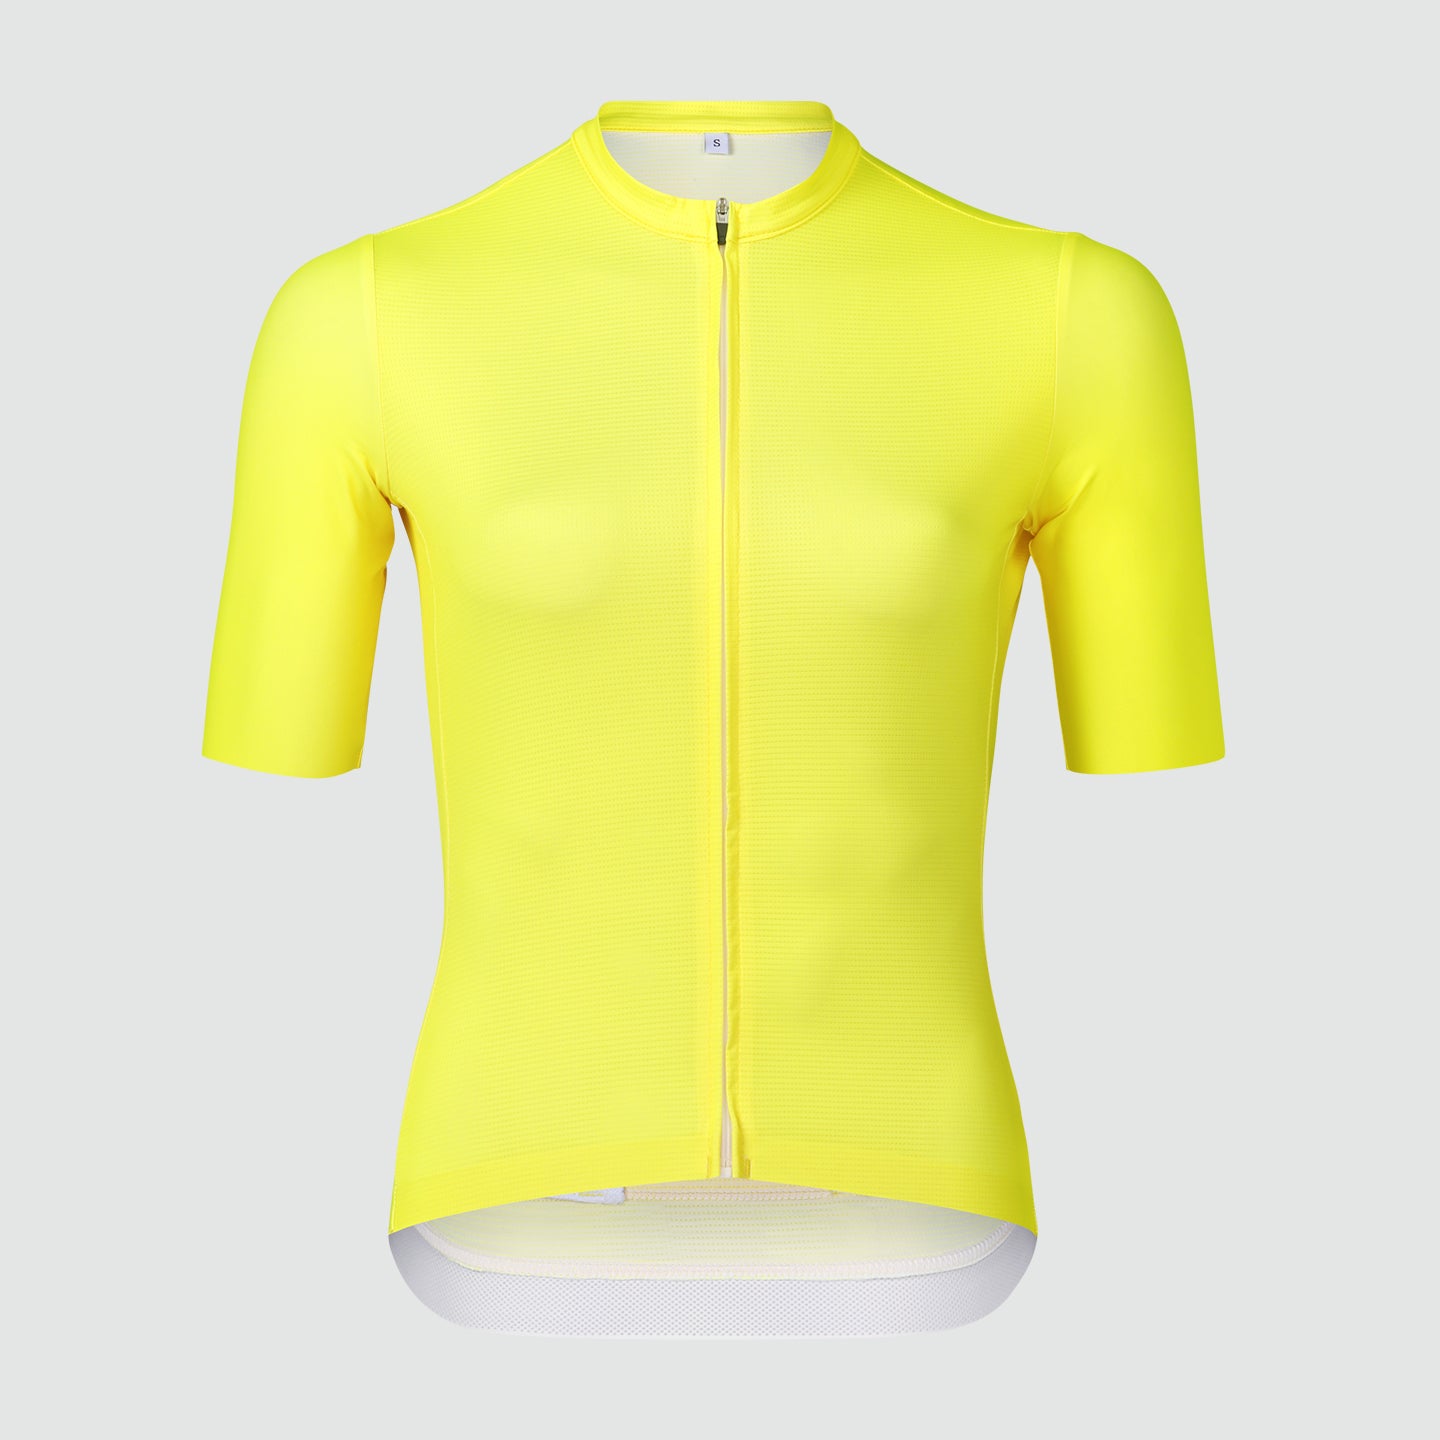 MOONLITE SS CYCLING JERSEY